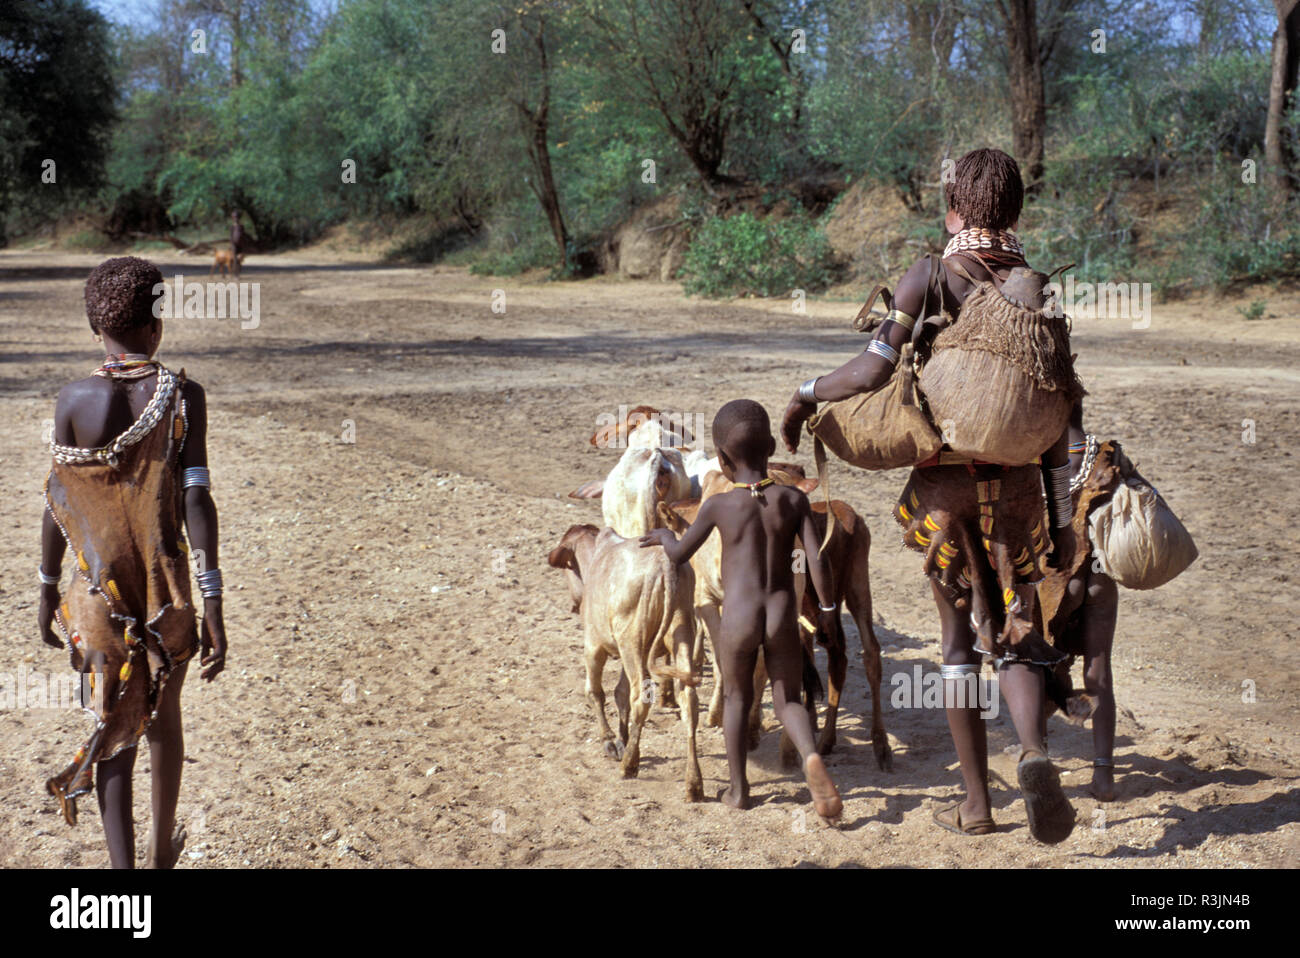 Africa, Ethiopia, Omo region. A Hamar tribe family leads cattle to a water hole. (MR) Stock Photo